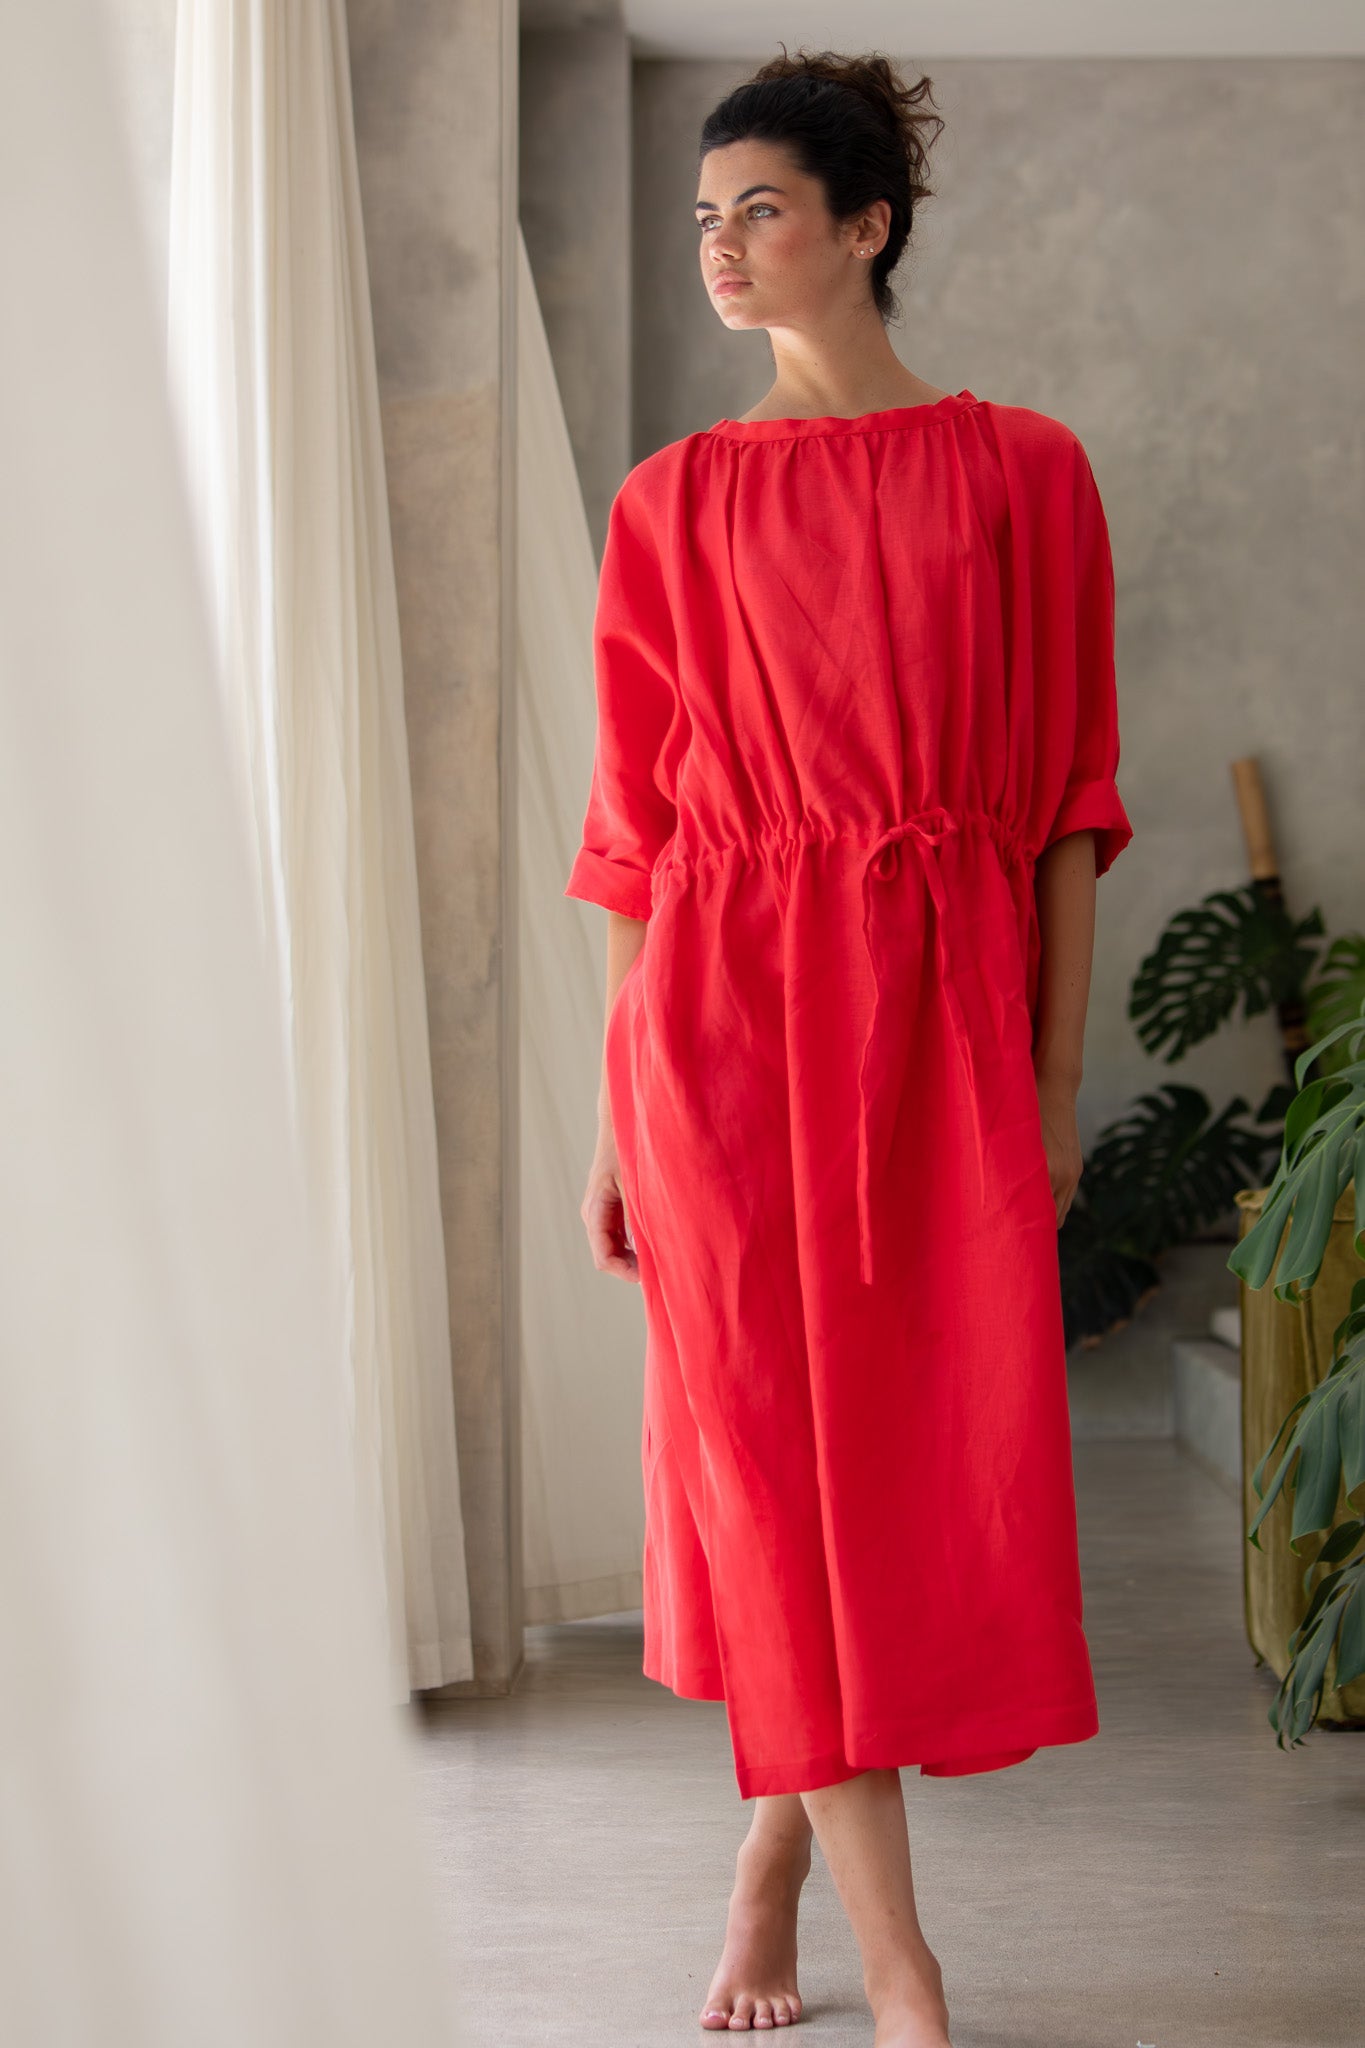 Red linen dress made using luxury fabric in Australia, Model standing gazing off to the right 